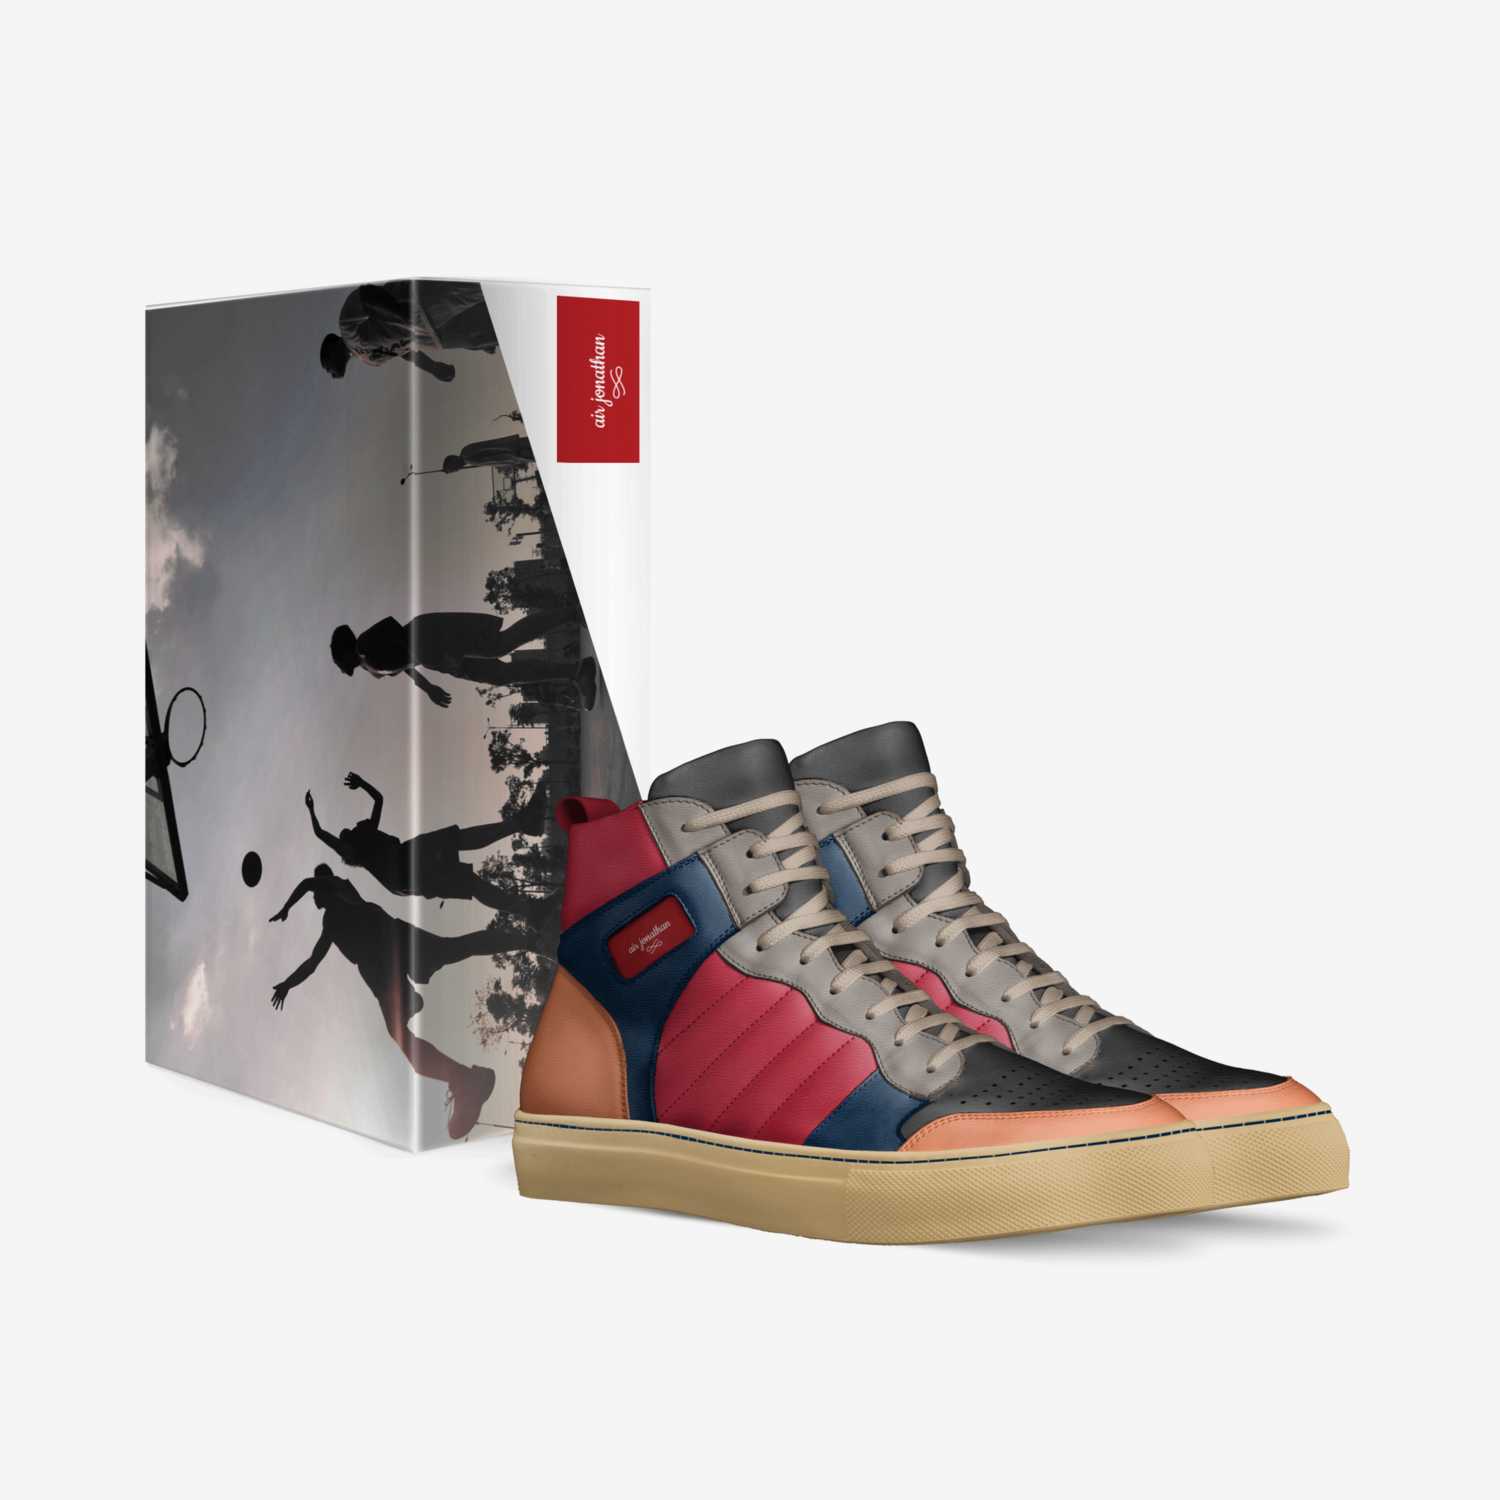 air jonathan custom made in Italy shoes by Jonathan Stclair | Box view